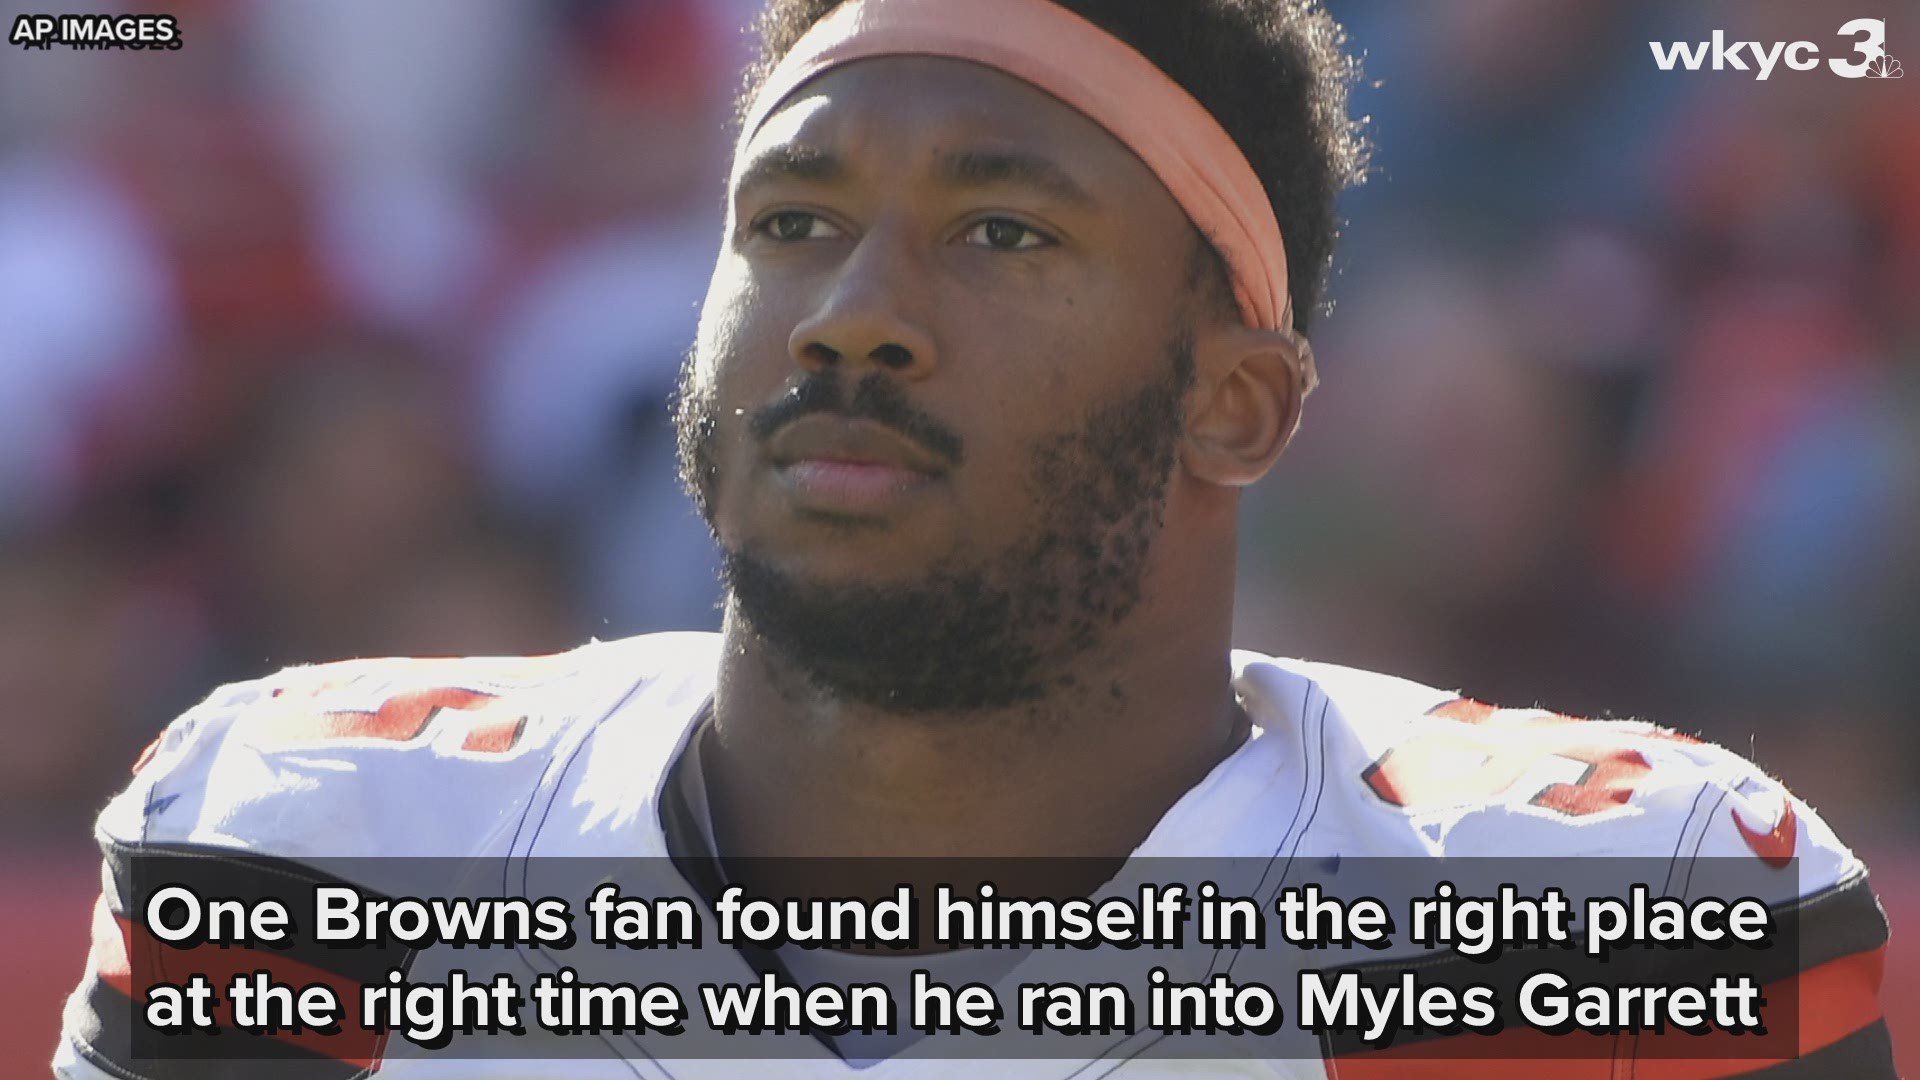 One Cleveland Browns fan found himself in the right place at the right time when he ran into Myles Garrett on Wednesday.